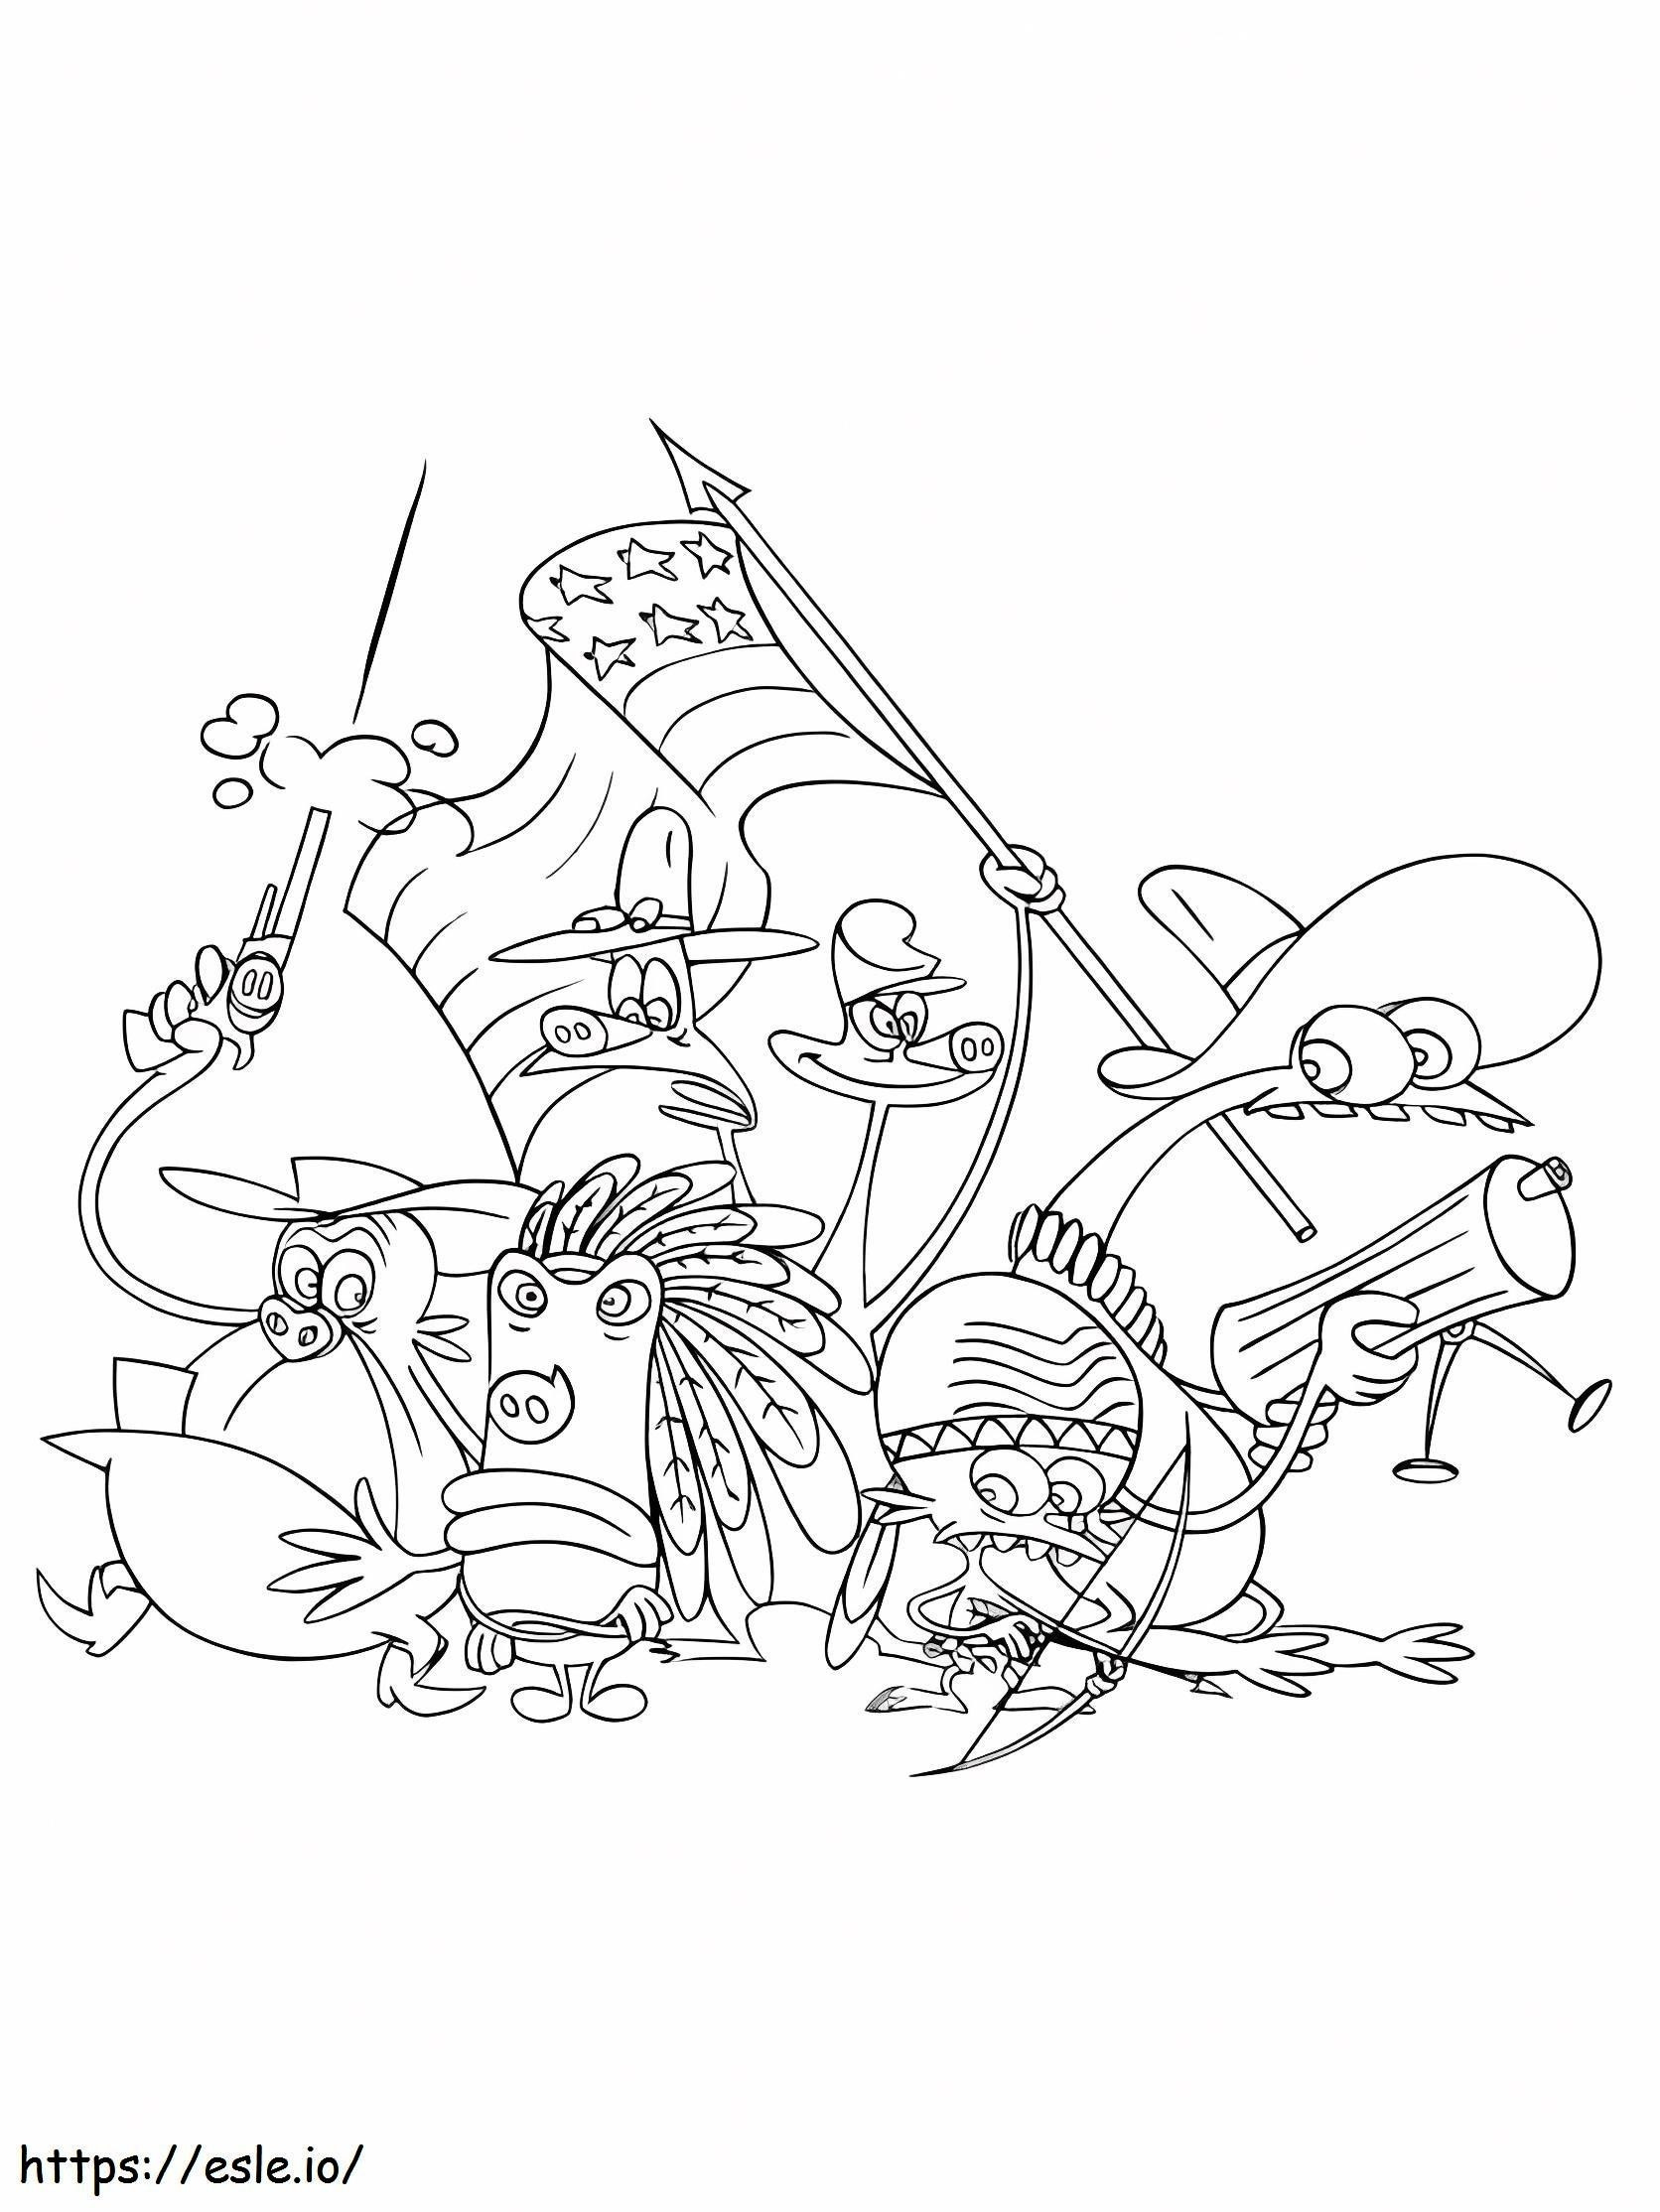 Print Space Goofs coloring page